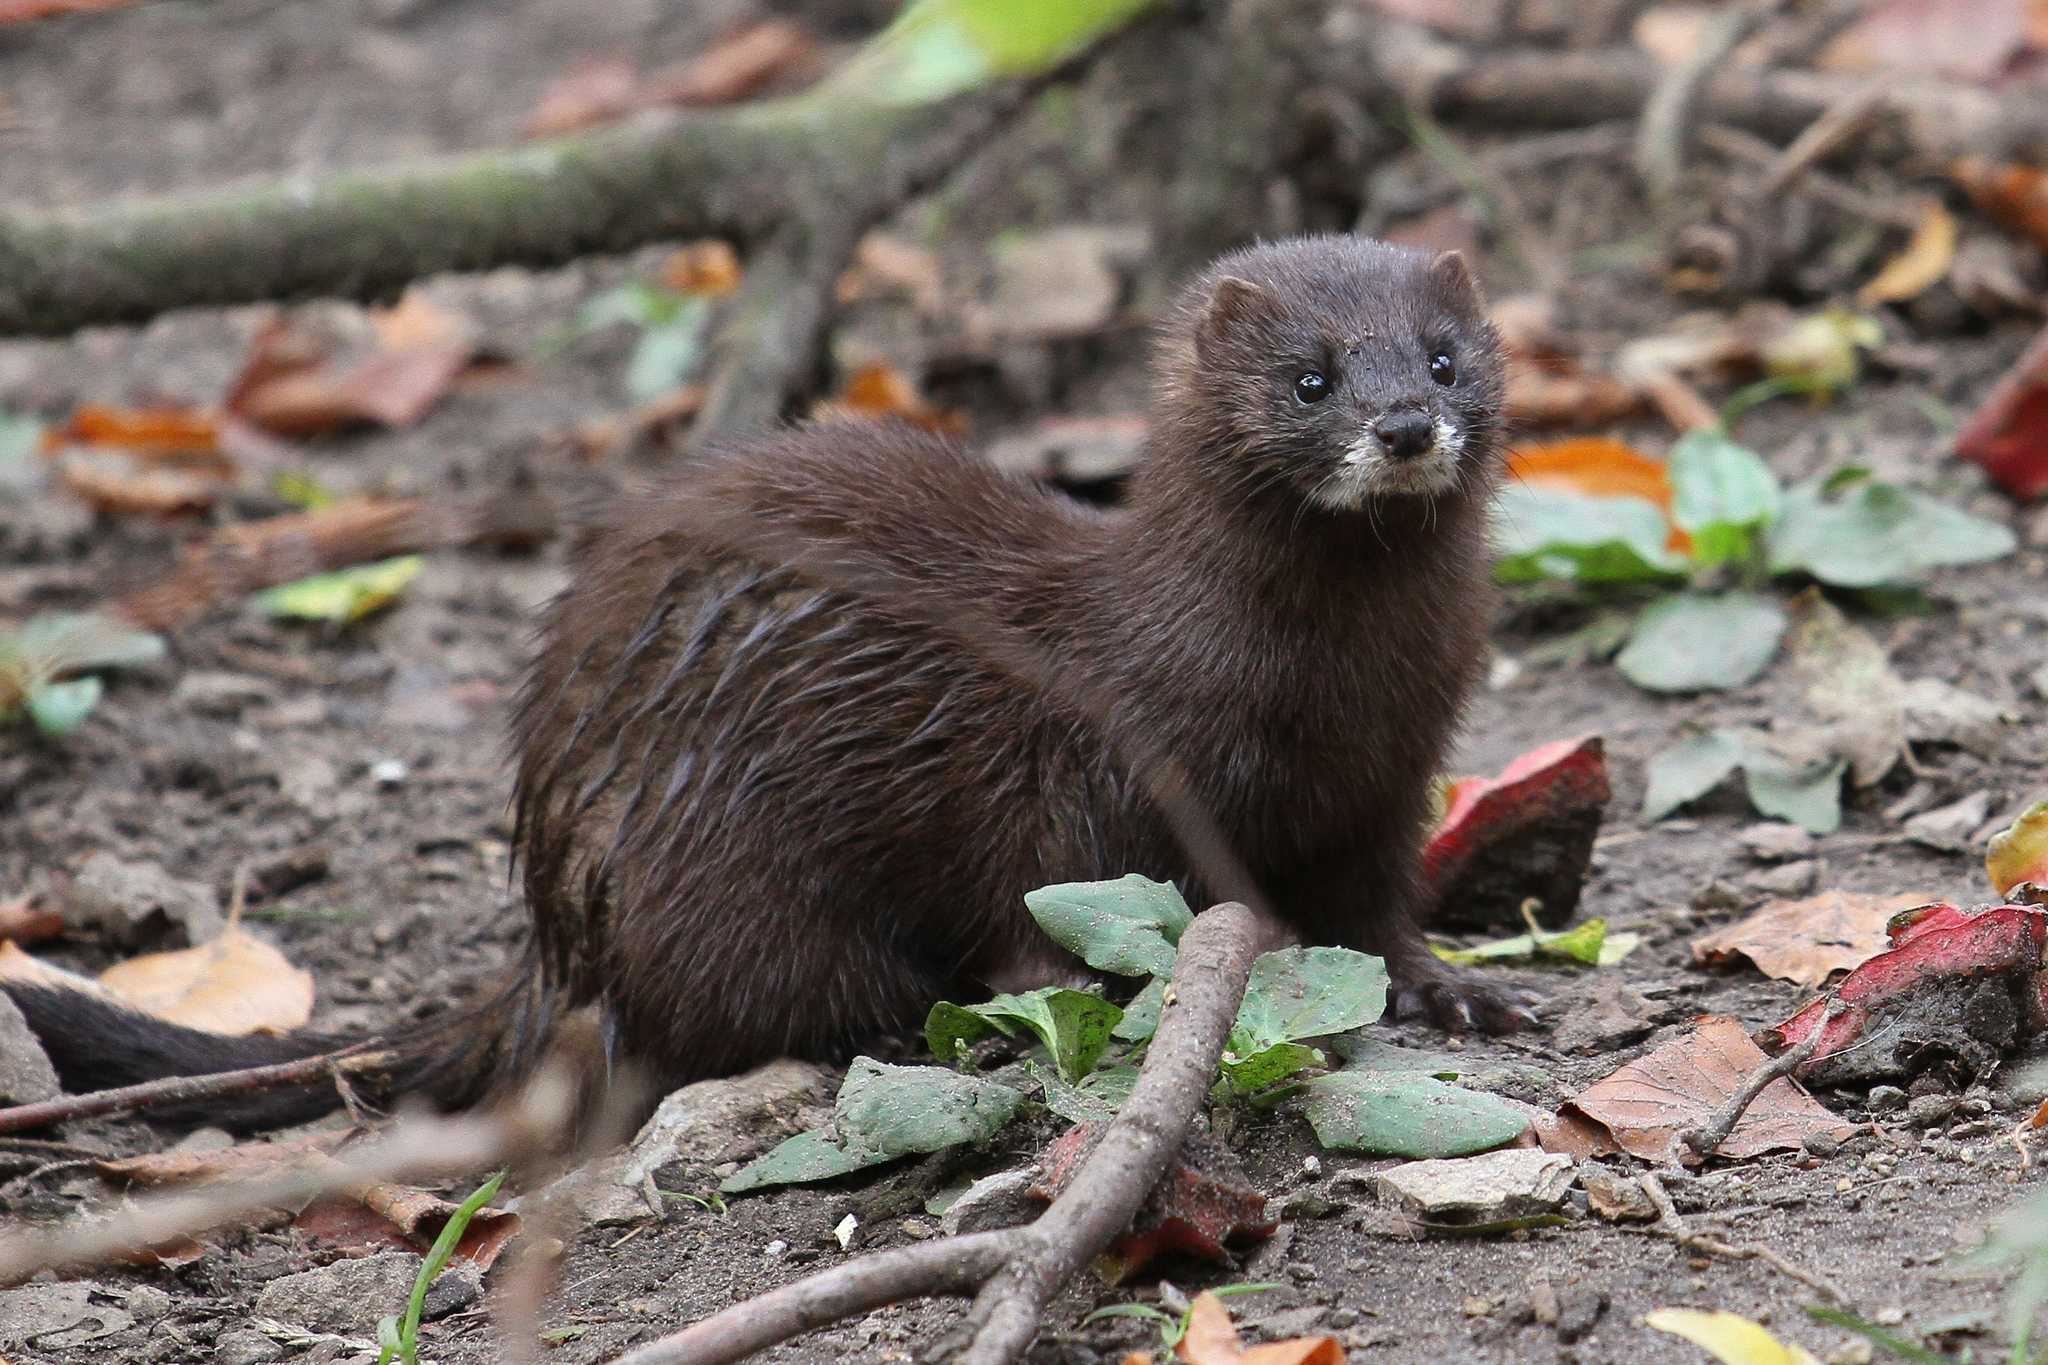 In the EU, 592 species are critically endangered. This is the last stage before a species goes extinct in the wild. Among the critically endangered is the European mink. Its population decreased steadily in the 20th century because of widespread hunting. Threats such as the invasive American mink and a decrease in their food source, crayfish, means their number is expected to decline further. Image credit - European mink by zoofanatic CC 2.0 BY